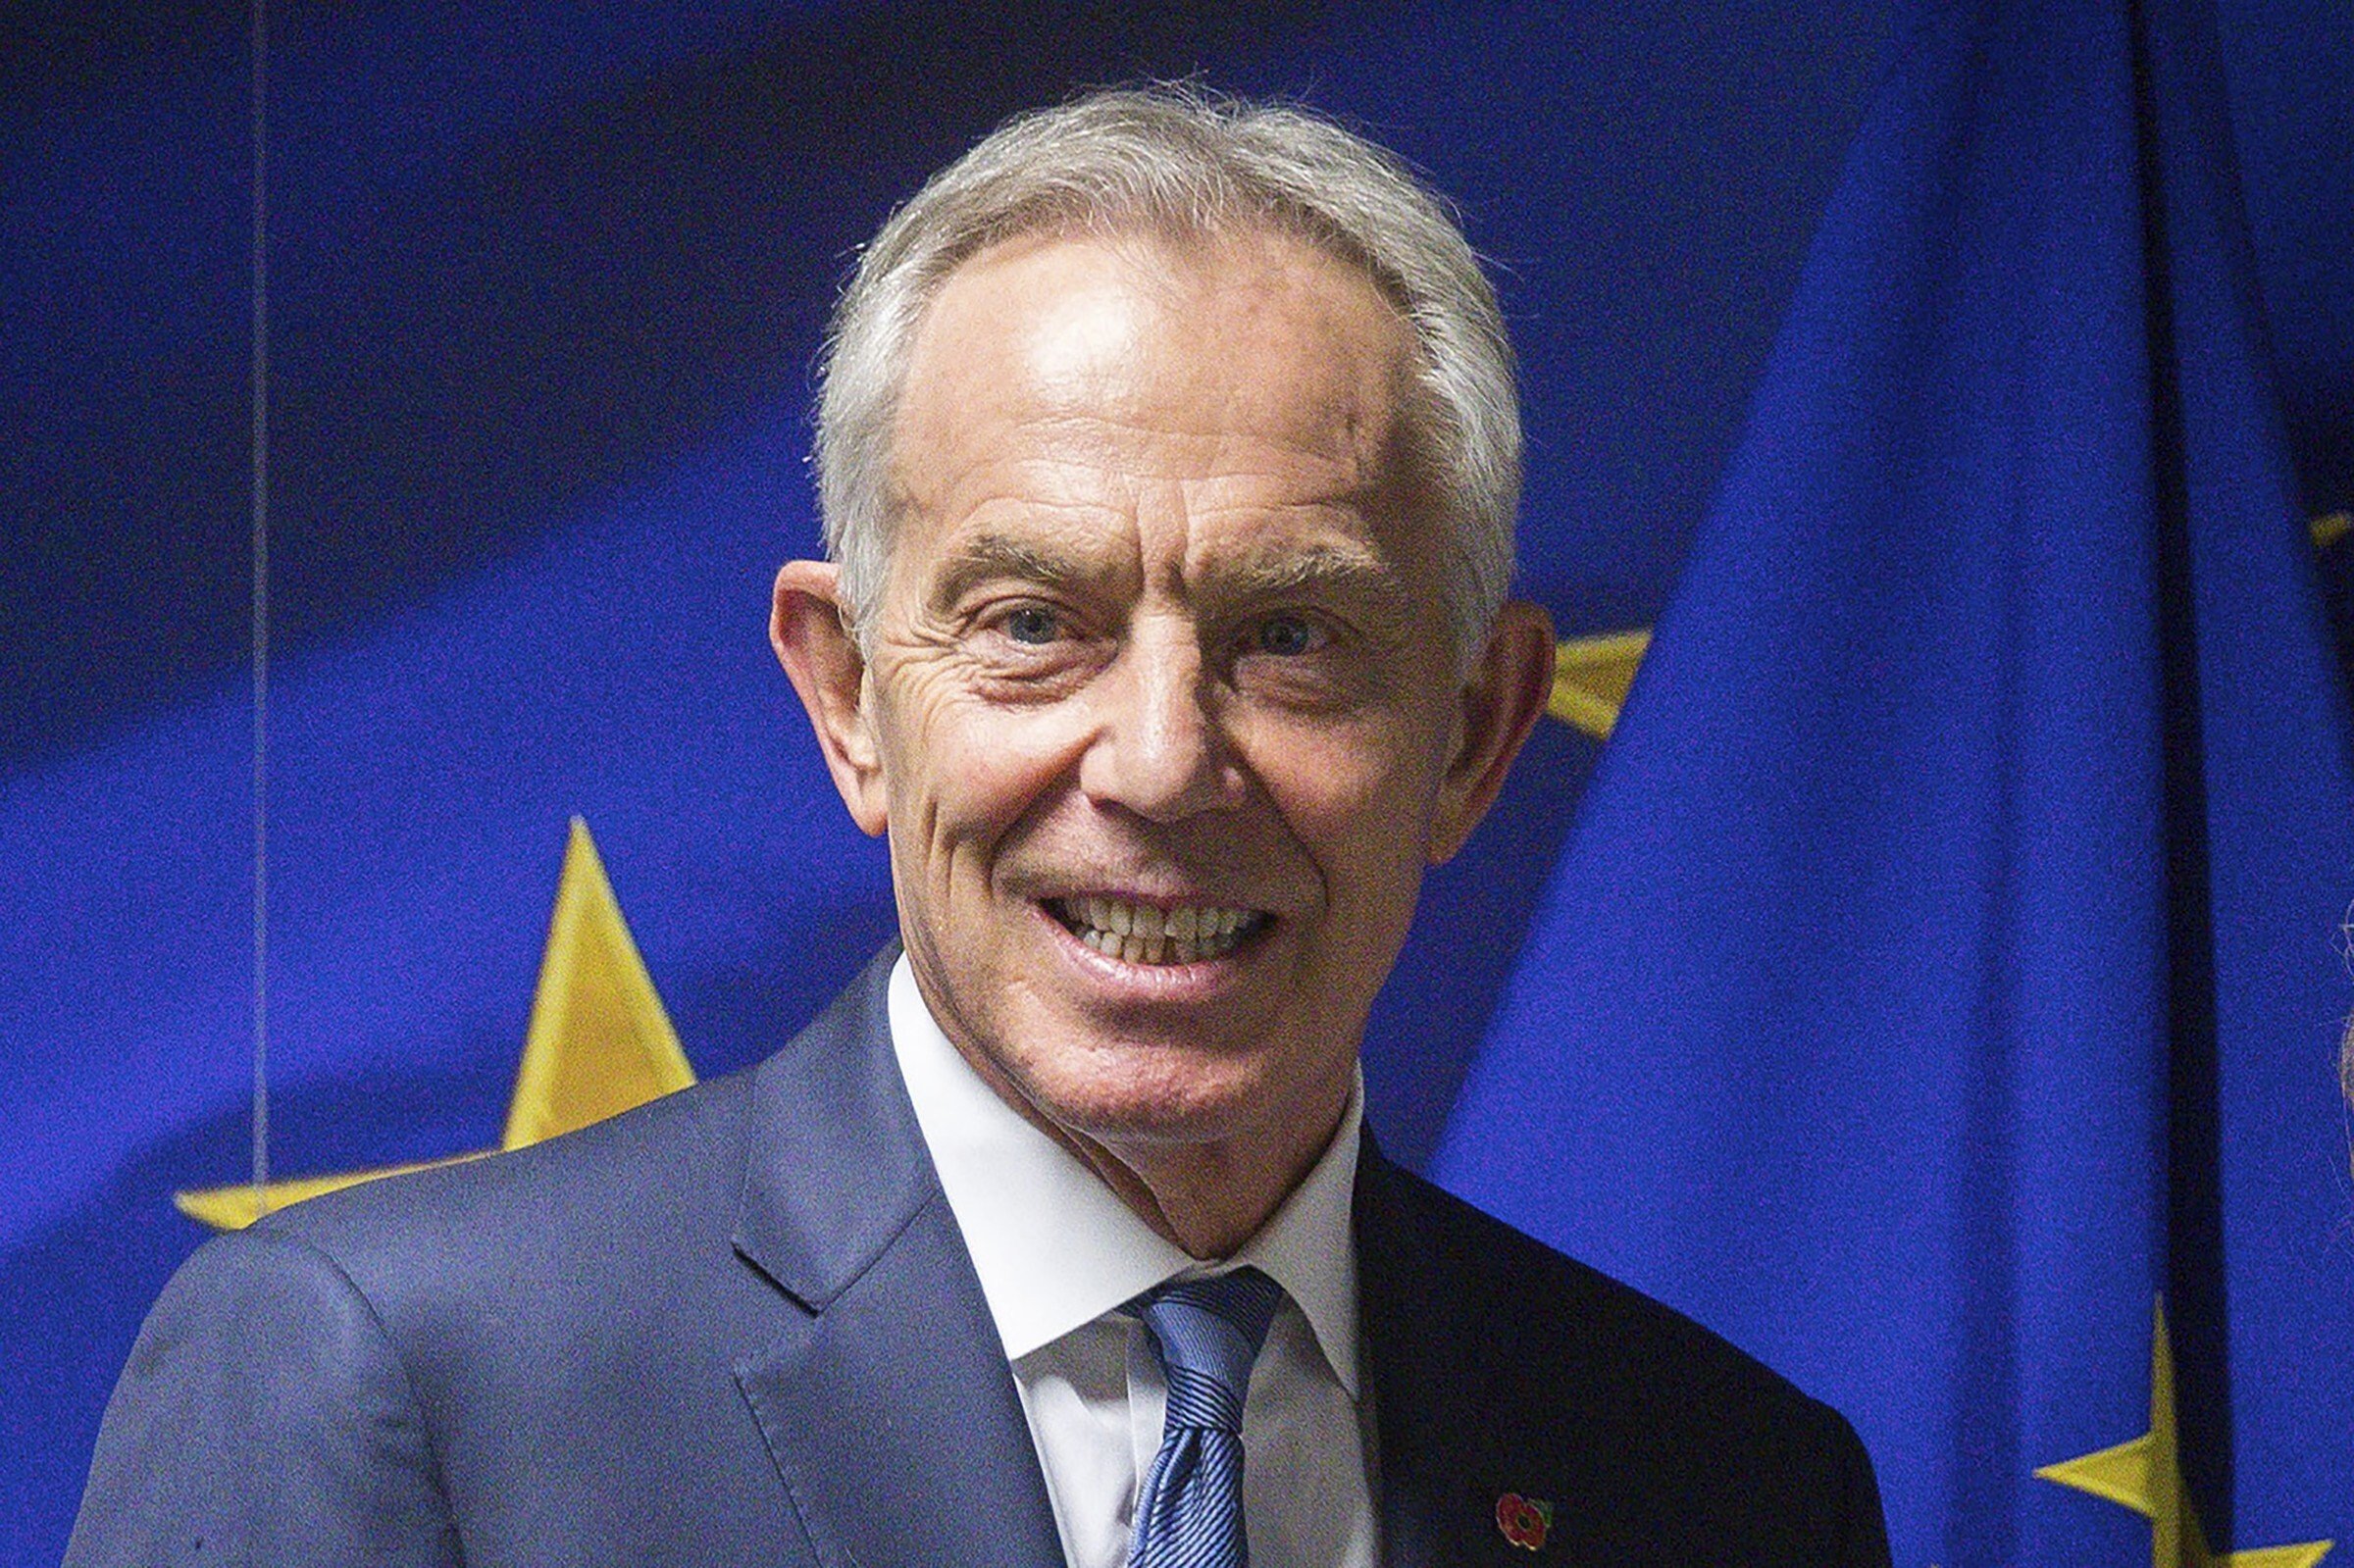 The documents show former UK prime minister Tony Blair and his wife saved around US$422,000 by using an offshore company to buy an almost US$9 million office in London. File photo: AP